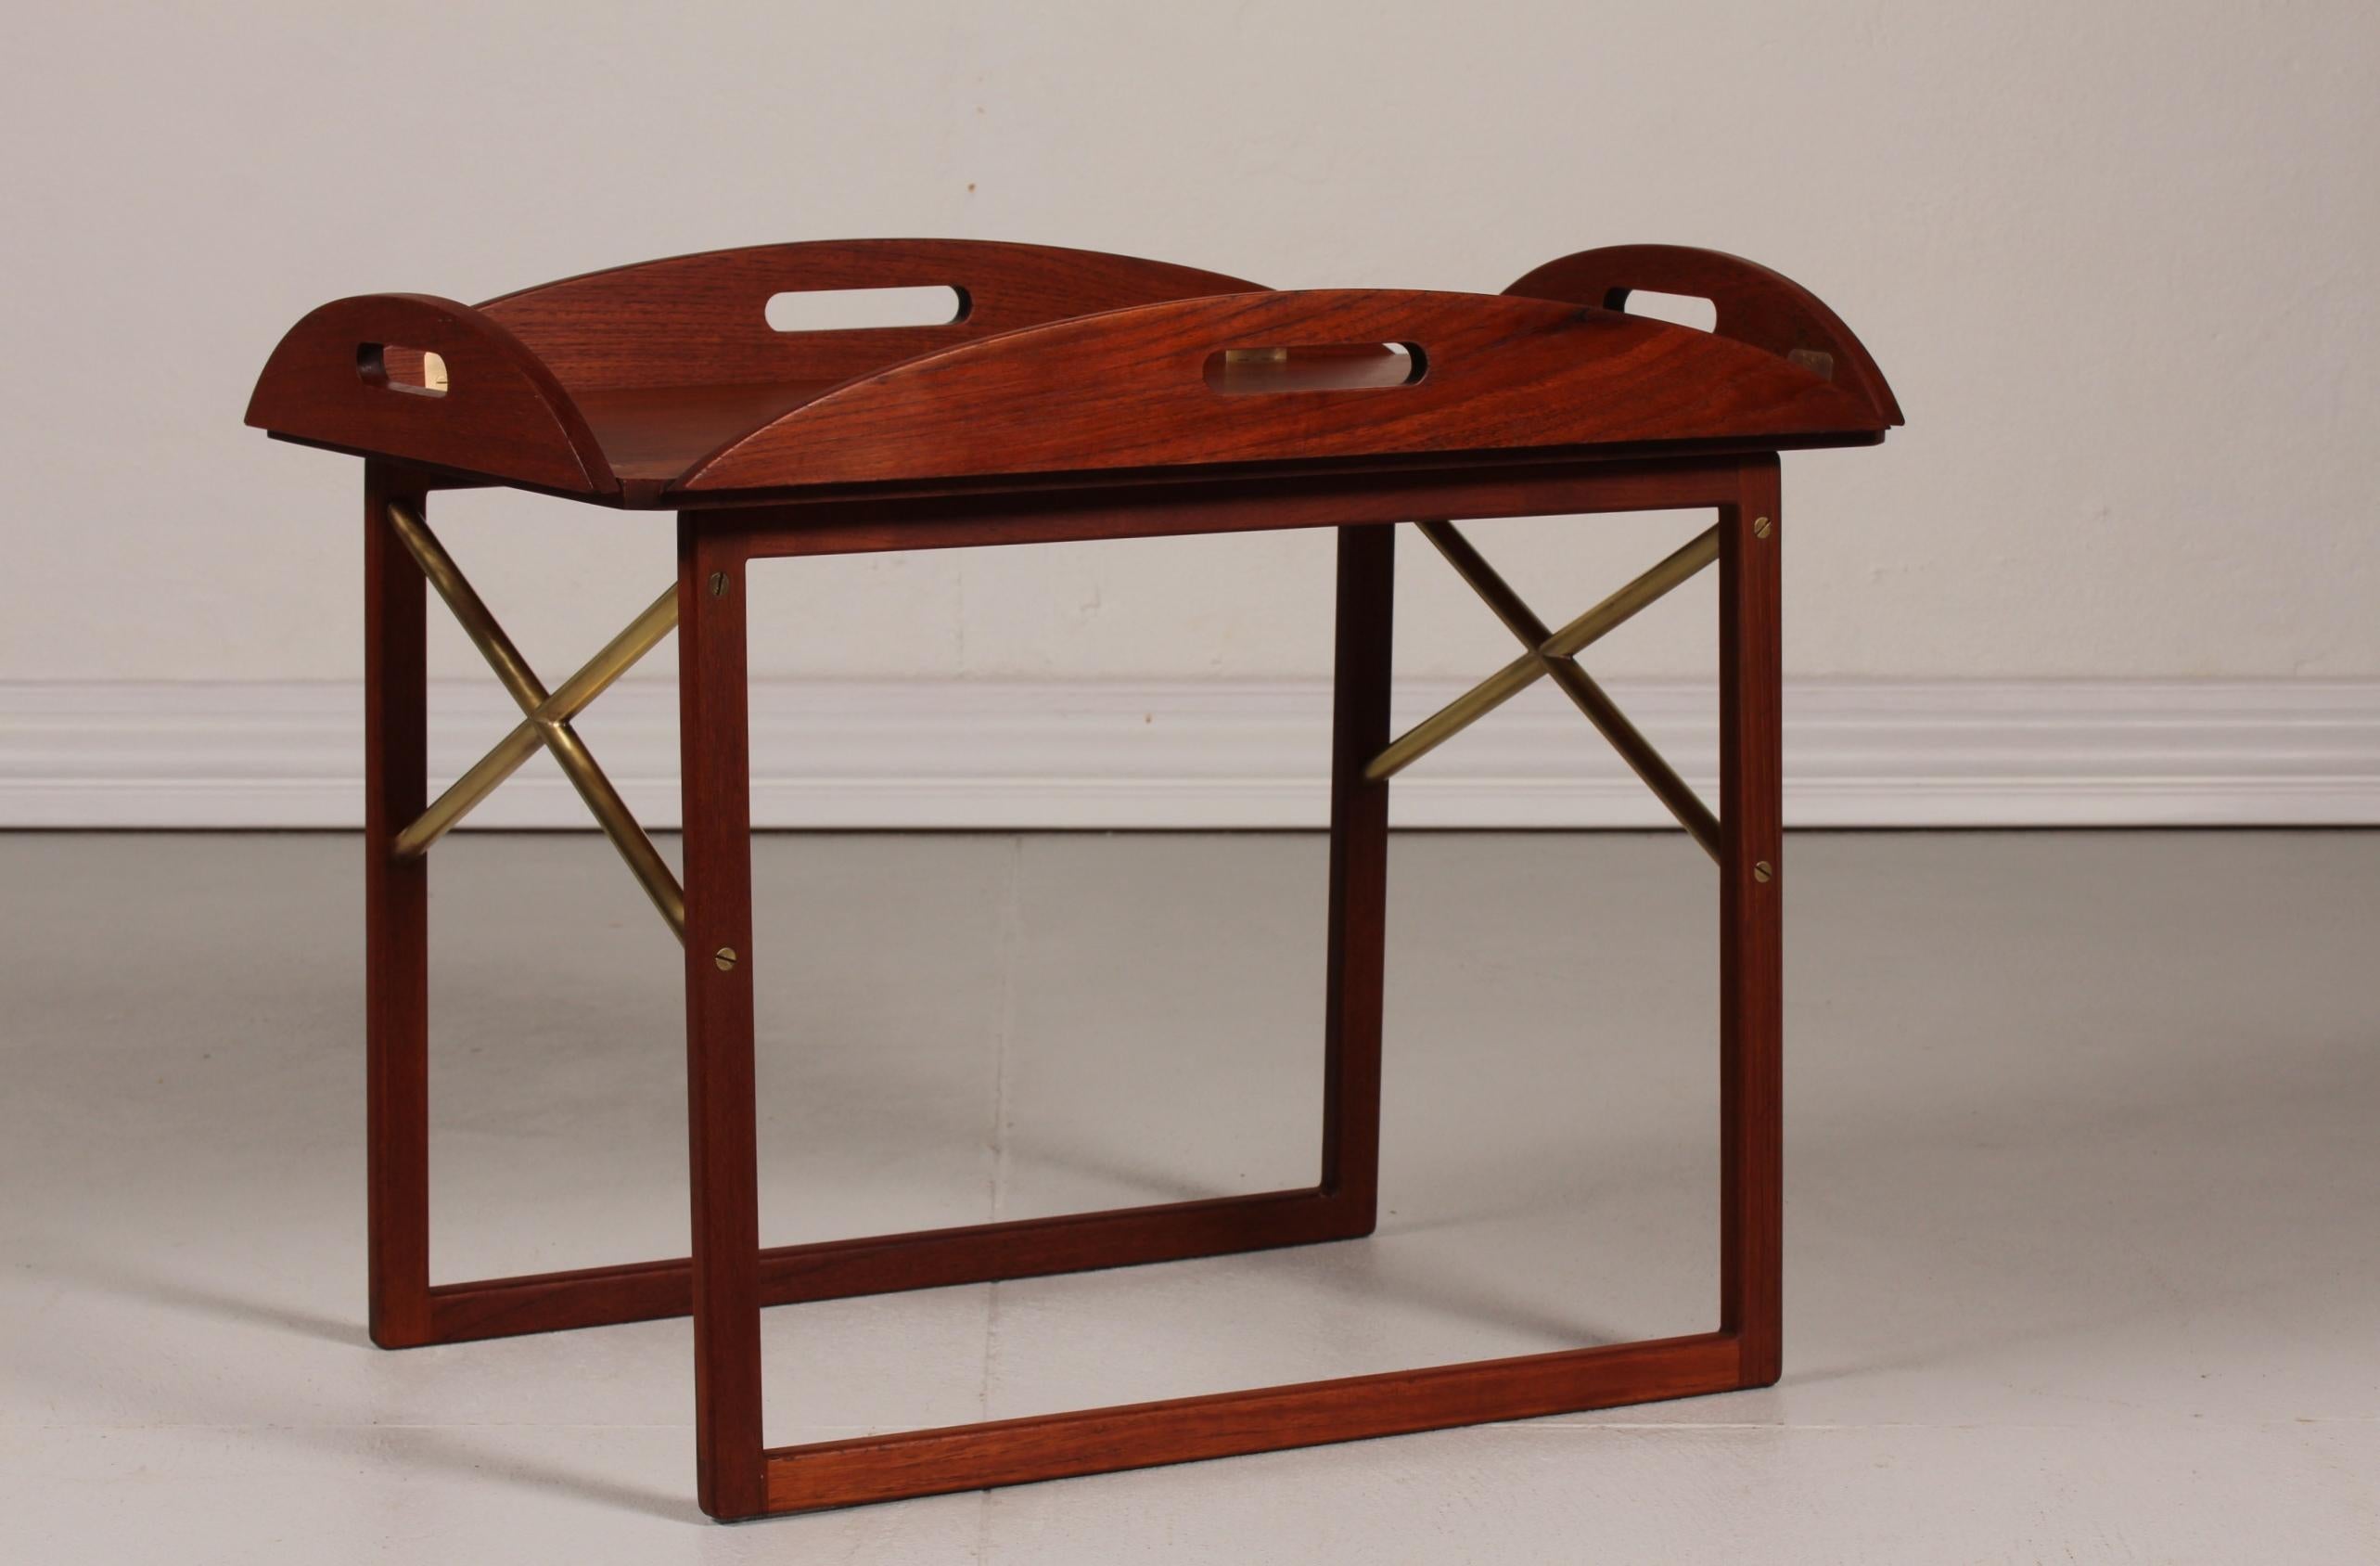 Butlers tray designed by Svend Langkilde made of teak with oil treatment and with hinges and parts of the under frame of brass.
It is possible to use the tray separately, as the tray and the frame are made in 2 sections.
Made for Illums Bolighus